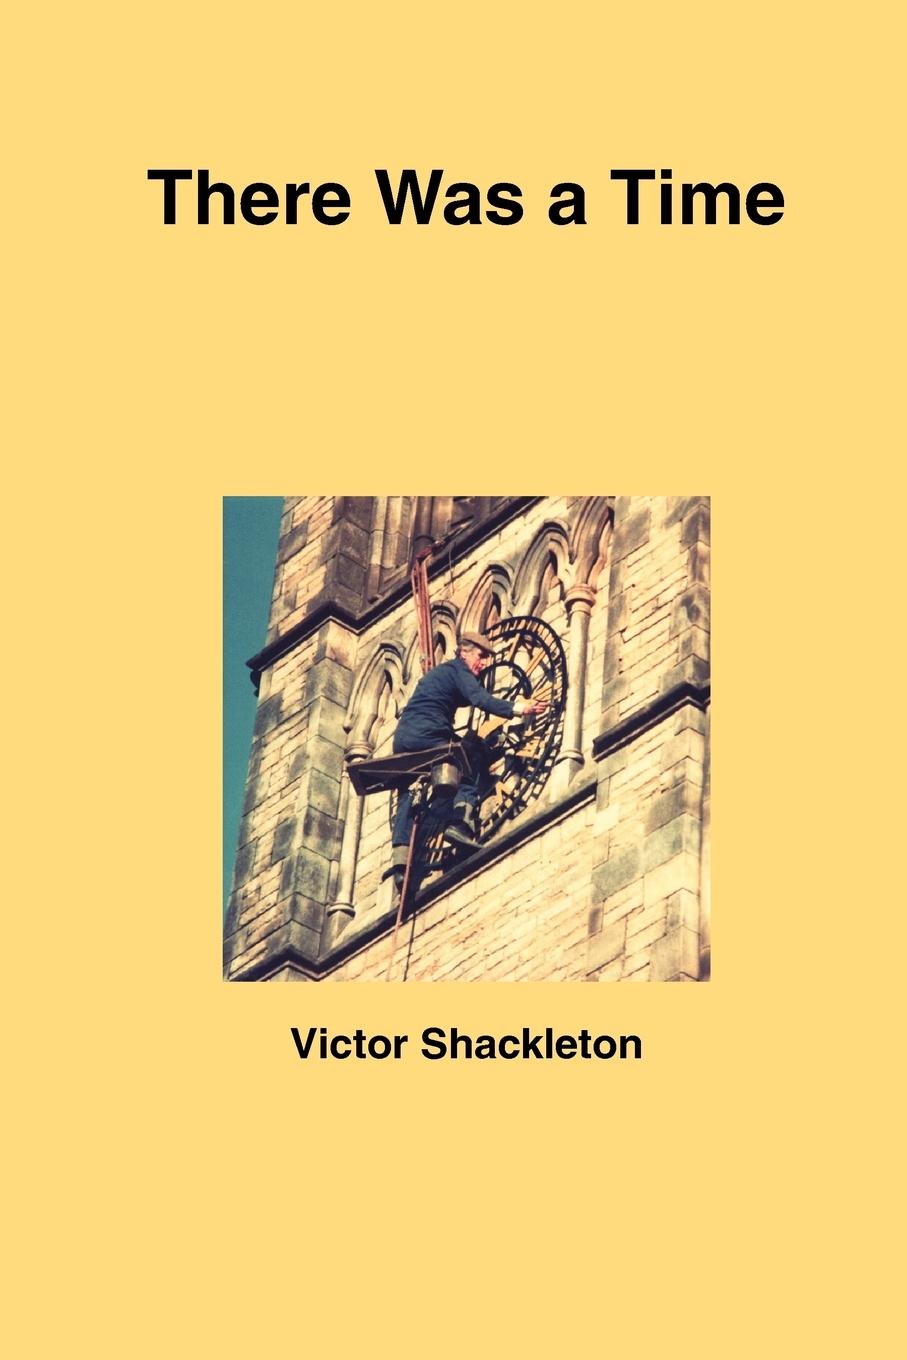 There Was a Time - Shackleton, Victor